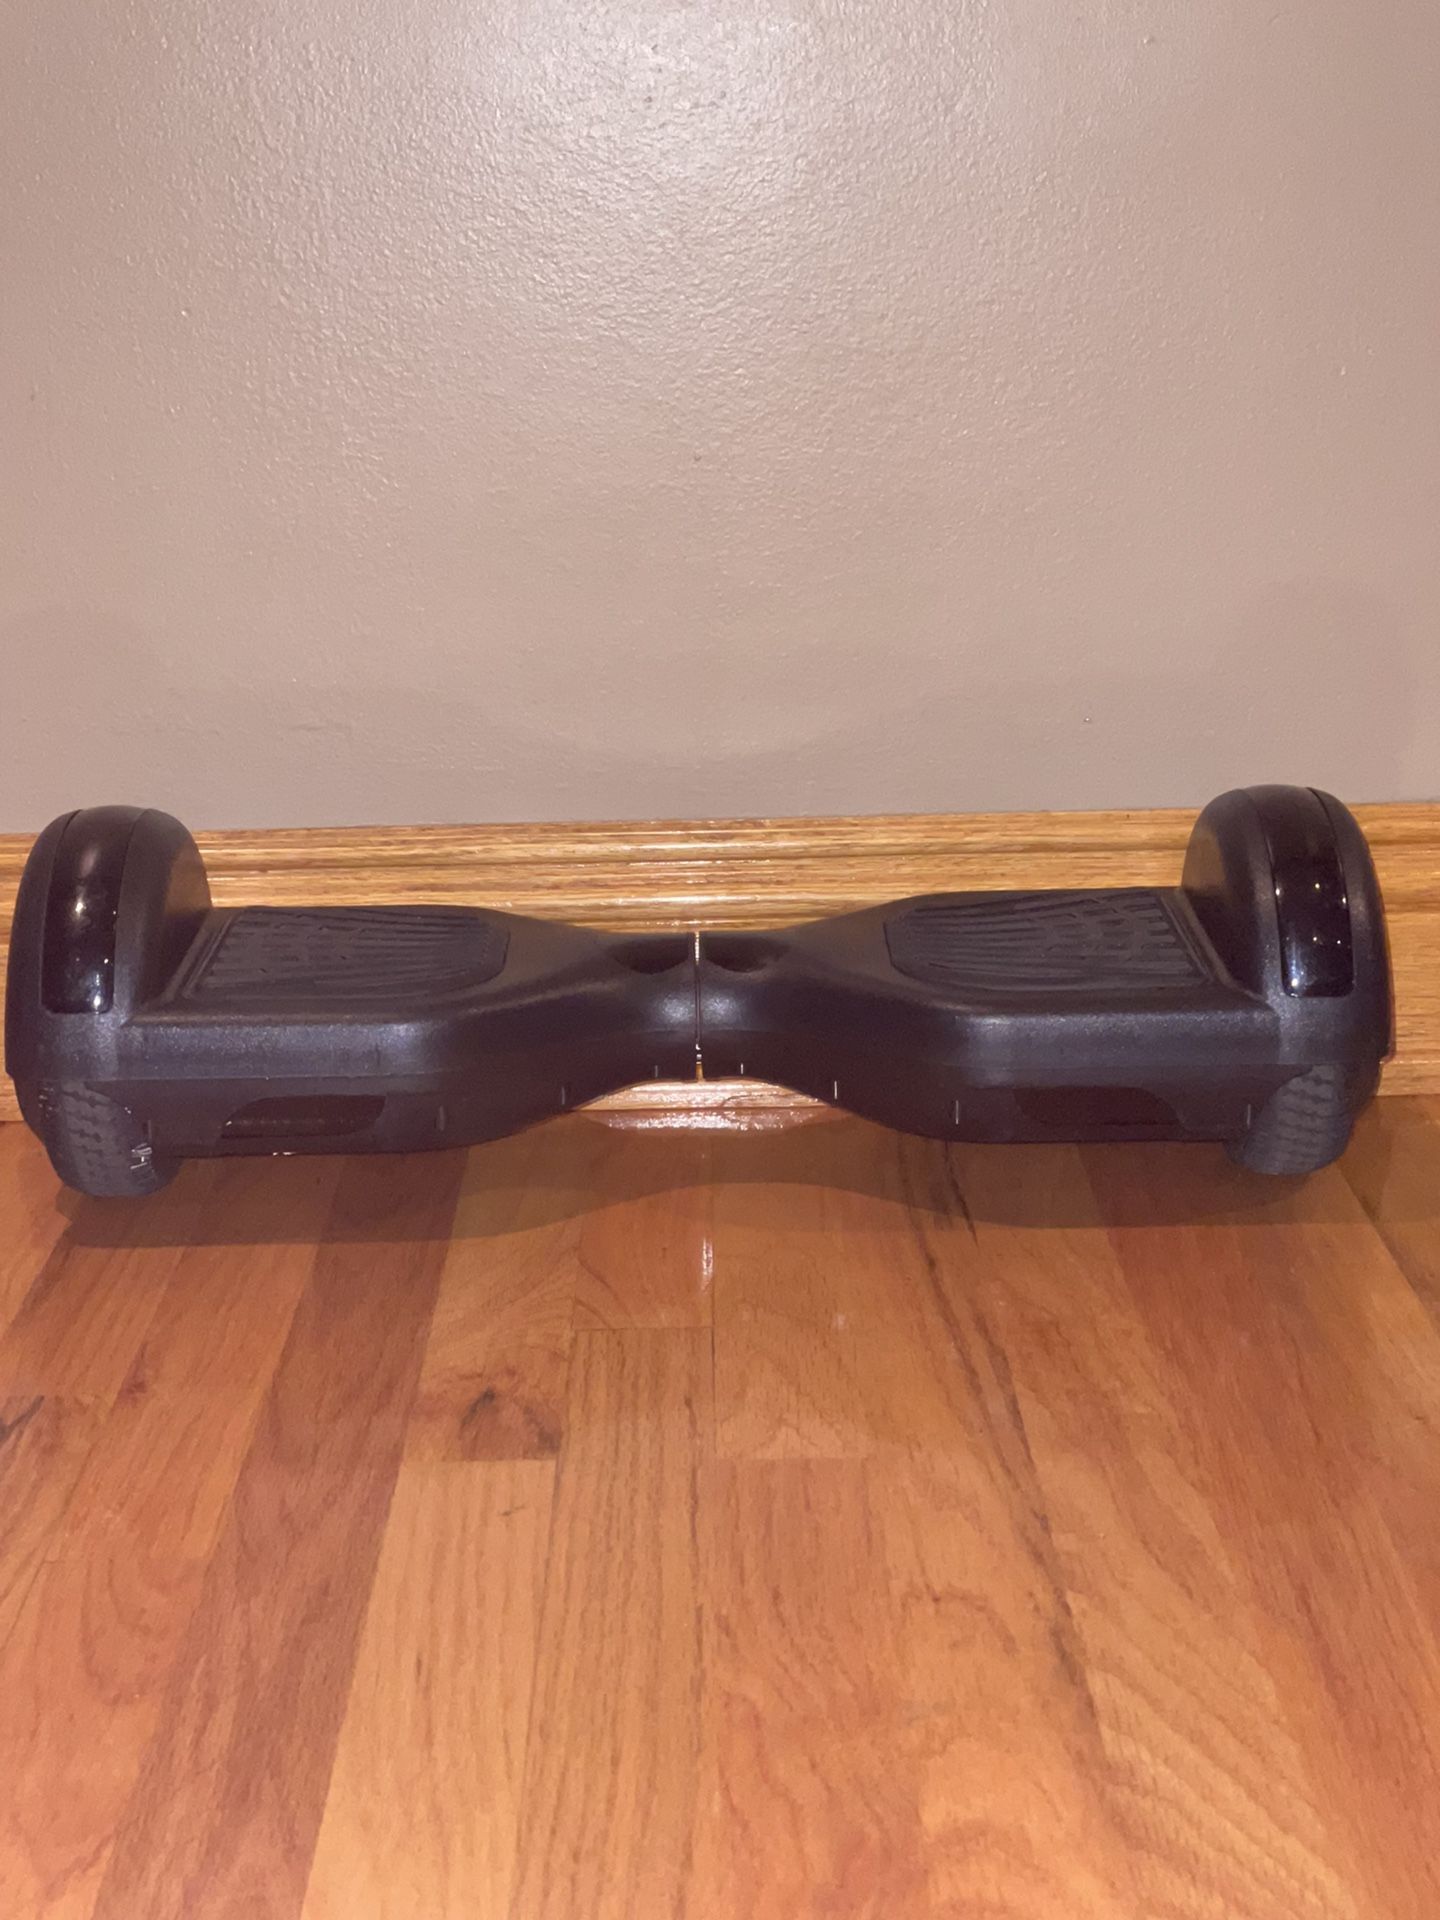 Bluetooth Hoverboard With LED Lights